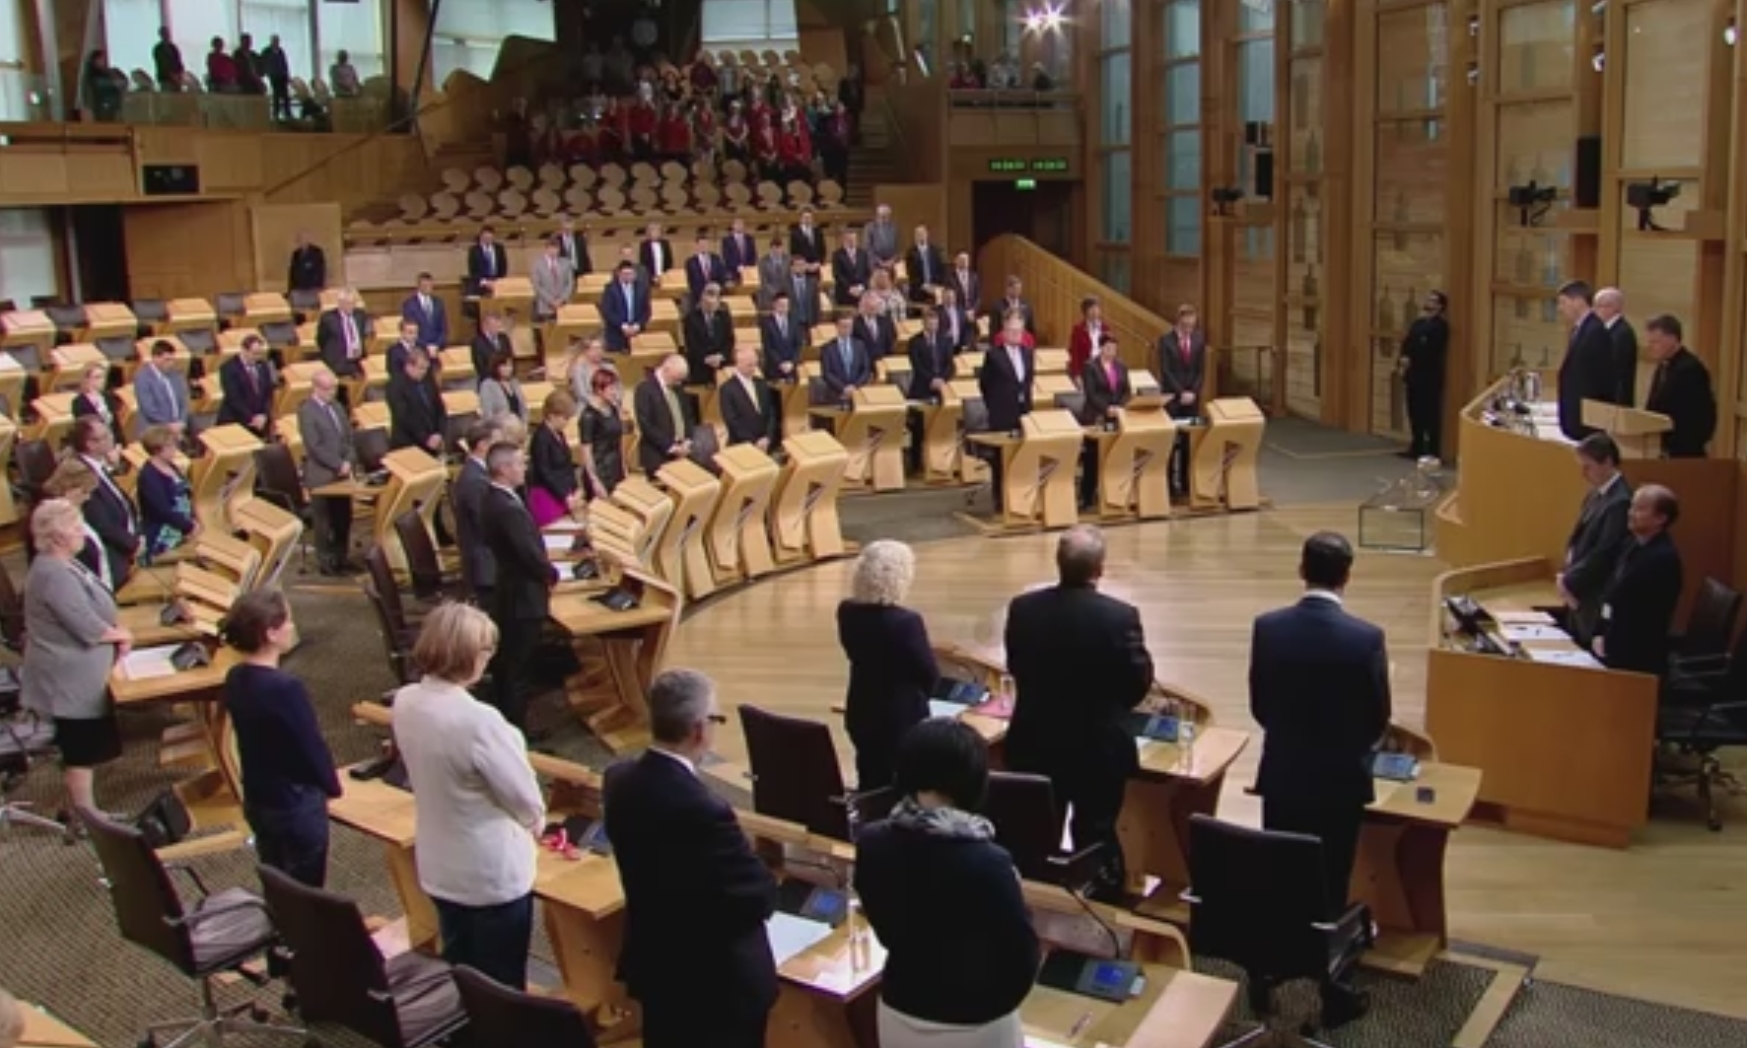 MSPs stand to observe a minute's silence in tribute to the victims of the Orlando shootings.